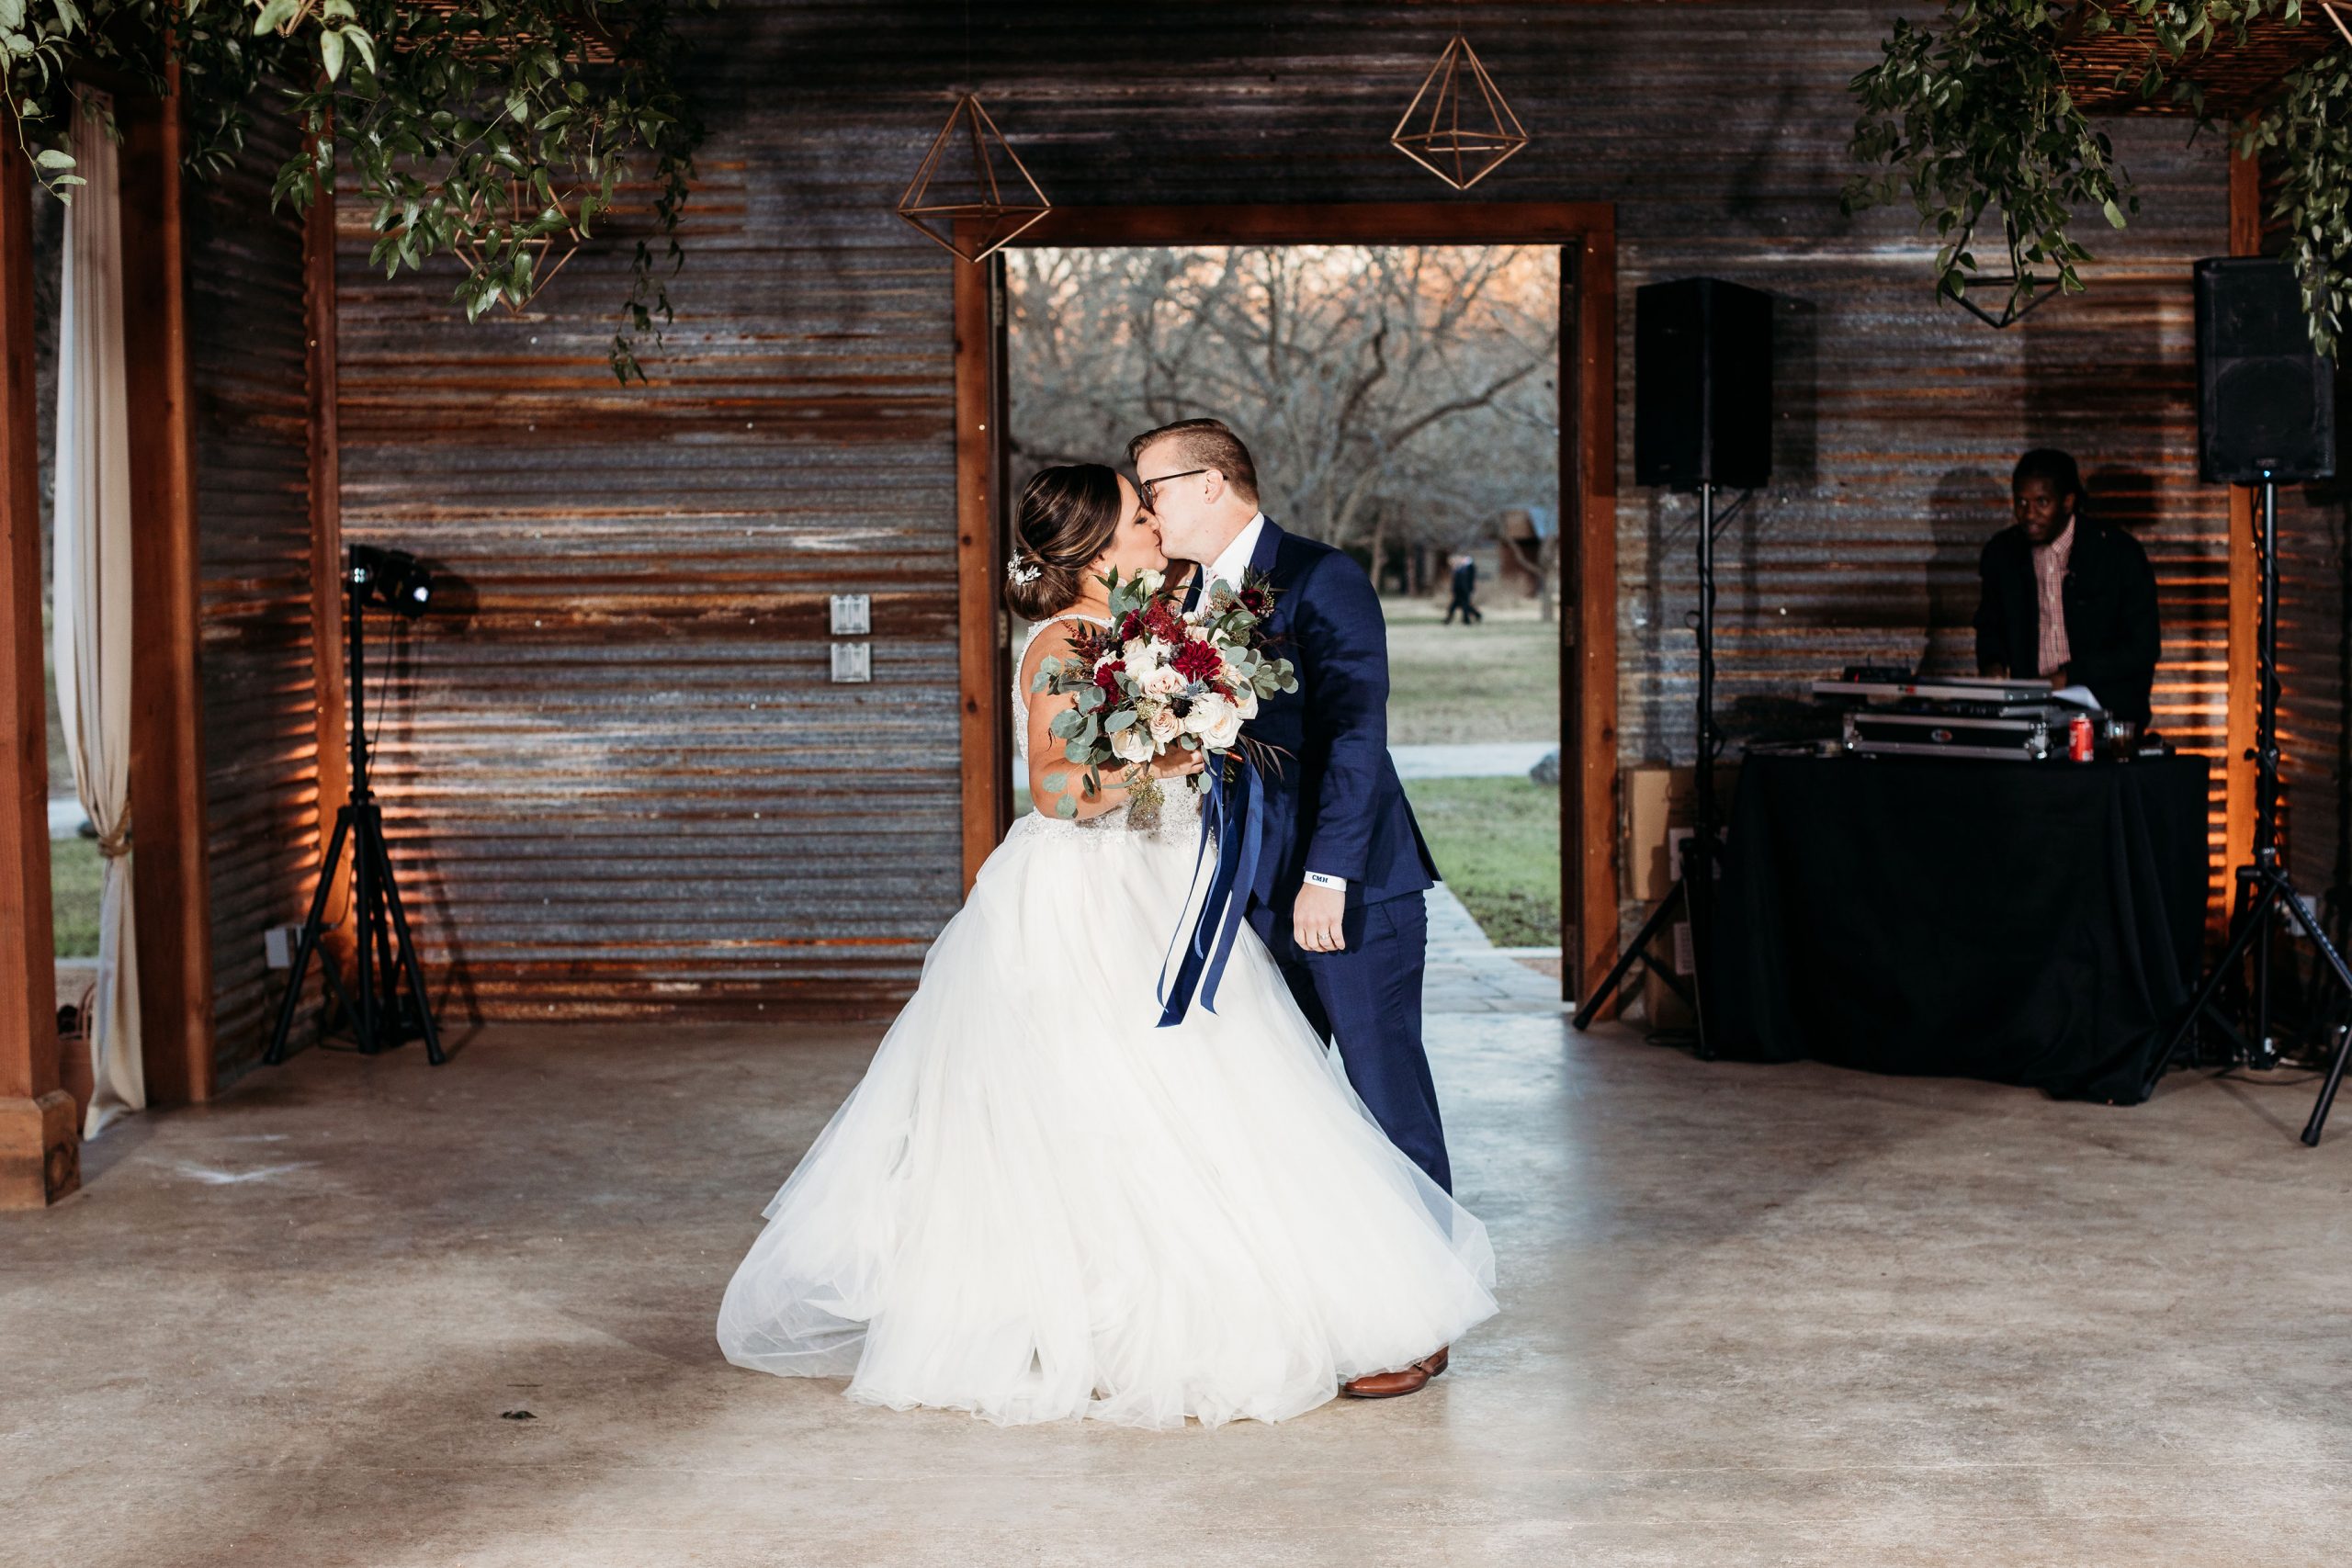 https://thewaterspoint.com/wp-content/uploads/sites/12125/2020/05/Hayes_Wedding_Reception-34-scaled.jpg